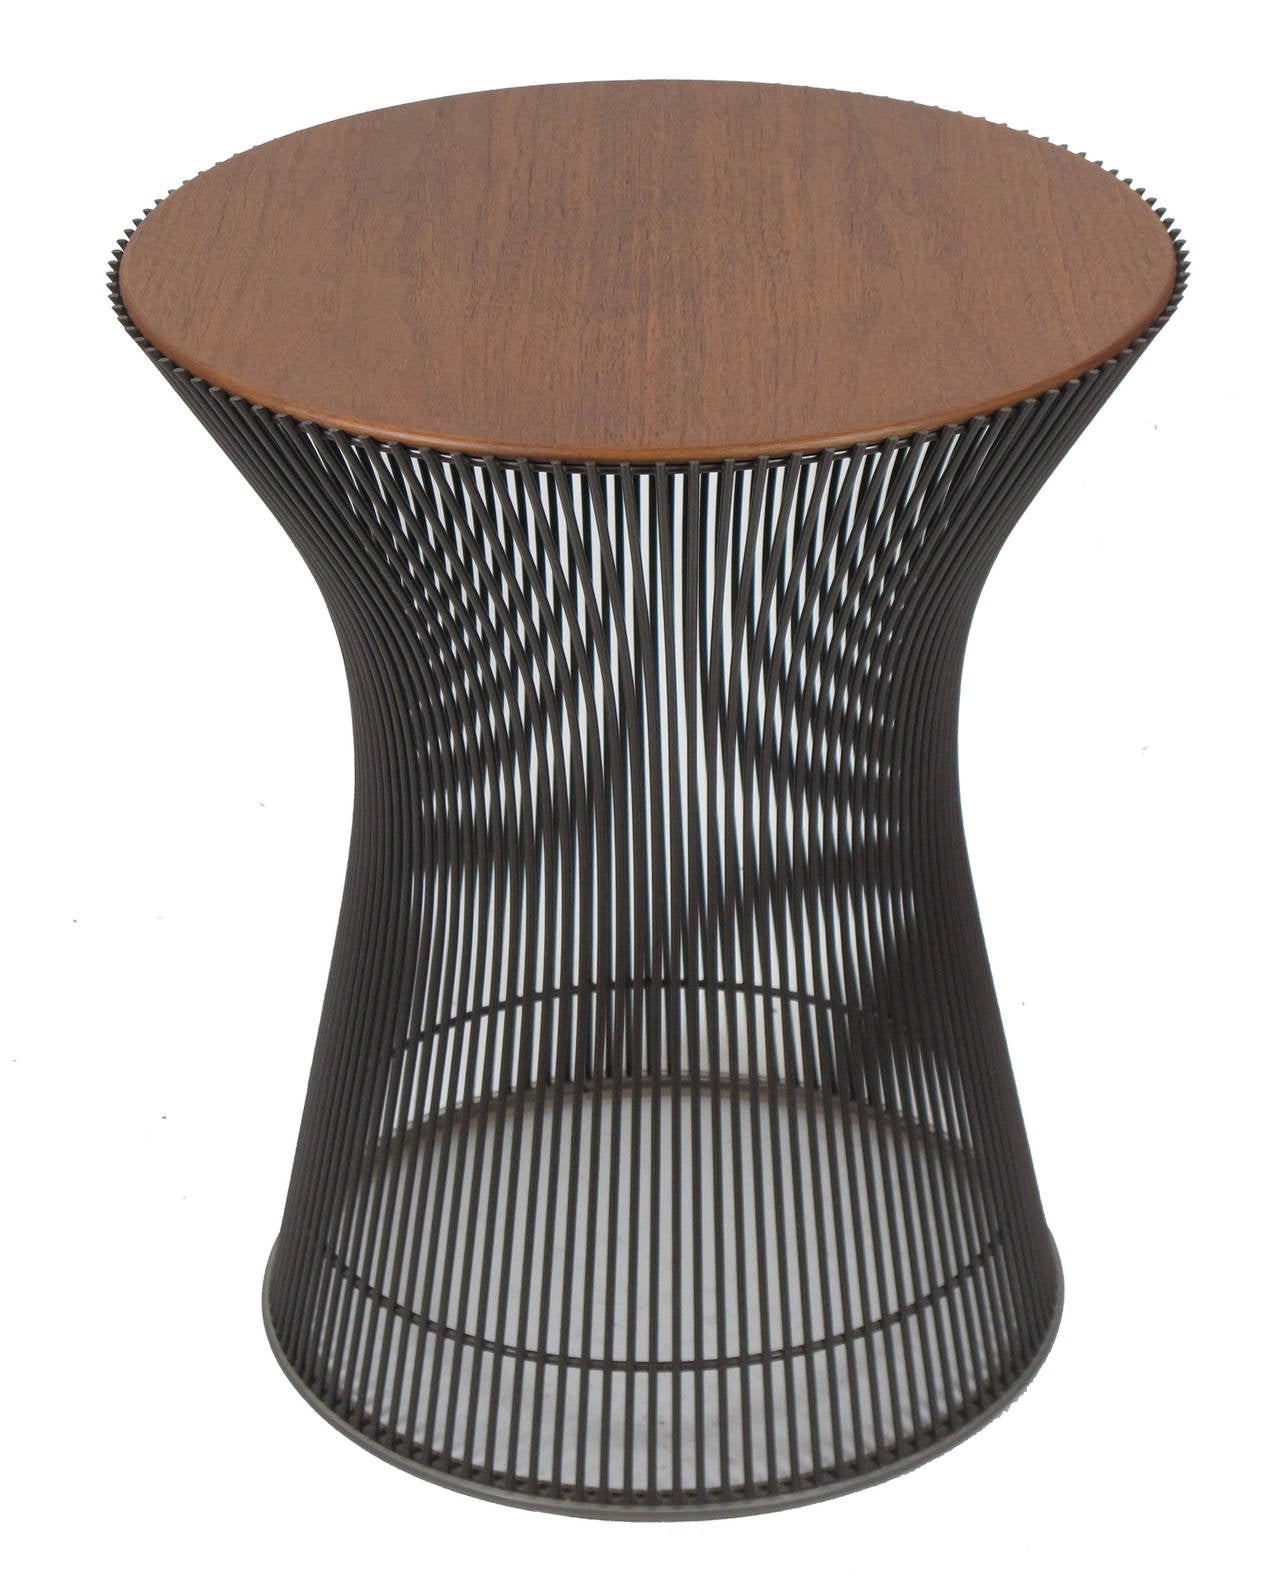 American Warren Platner for Knoll Side Table with Inset Wood Top in Bronze